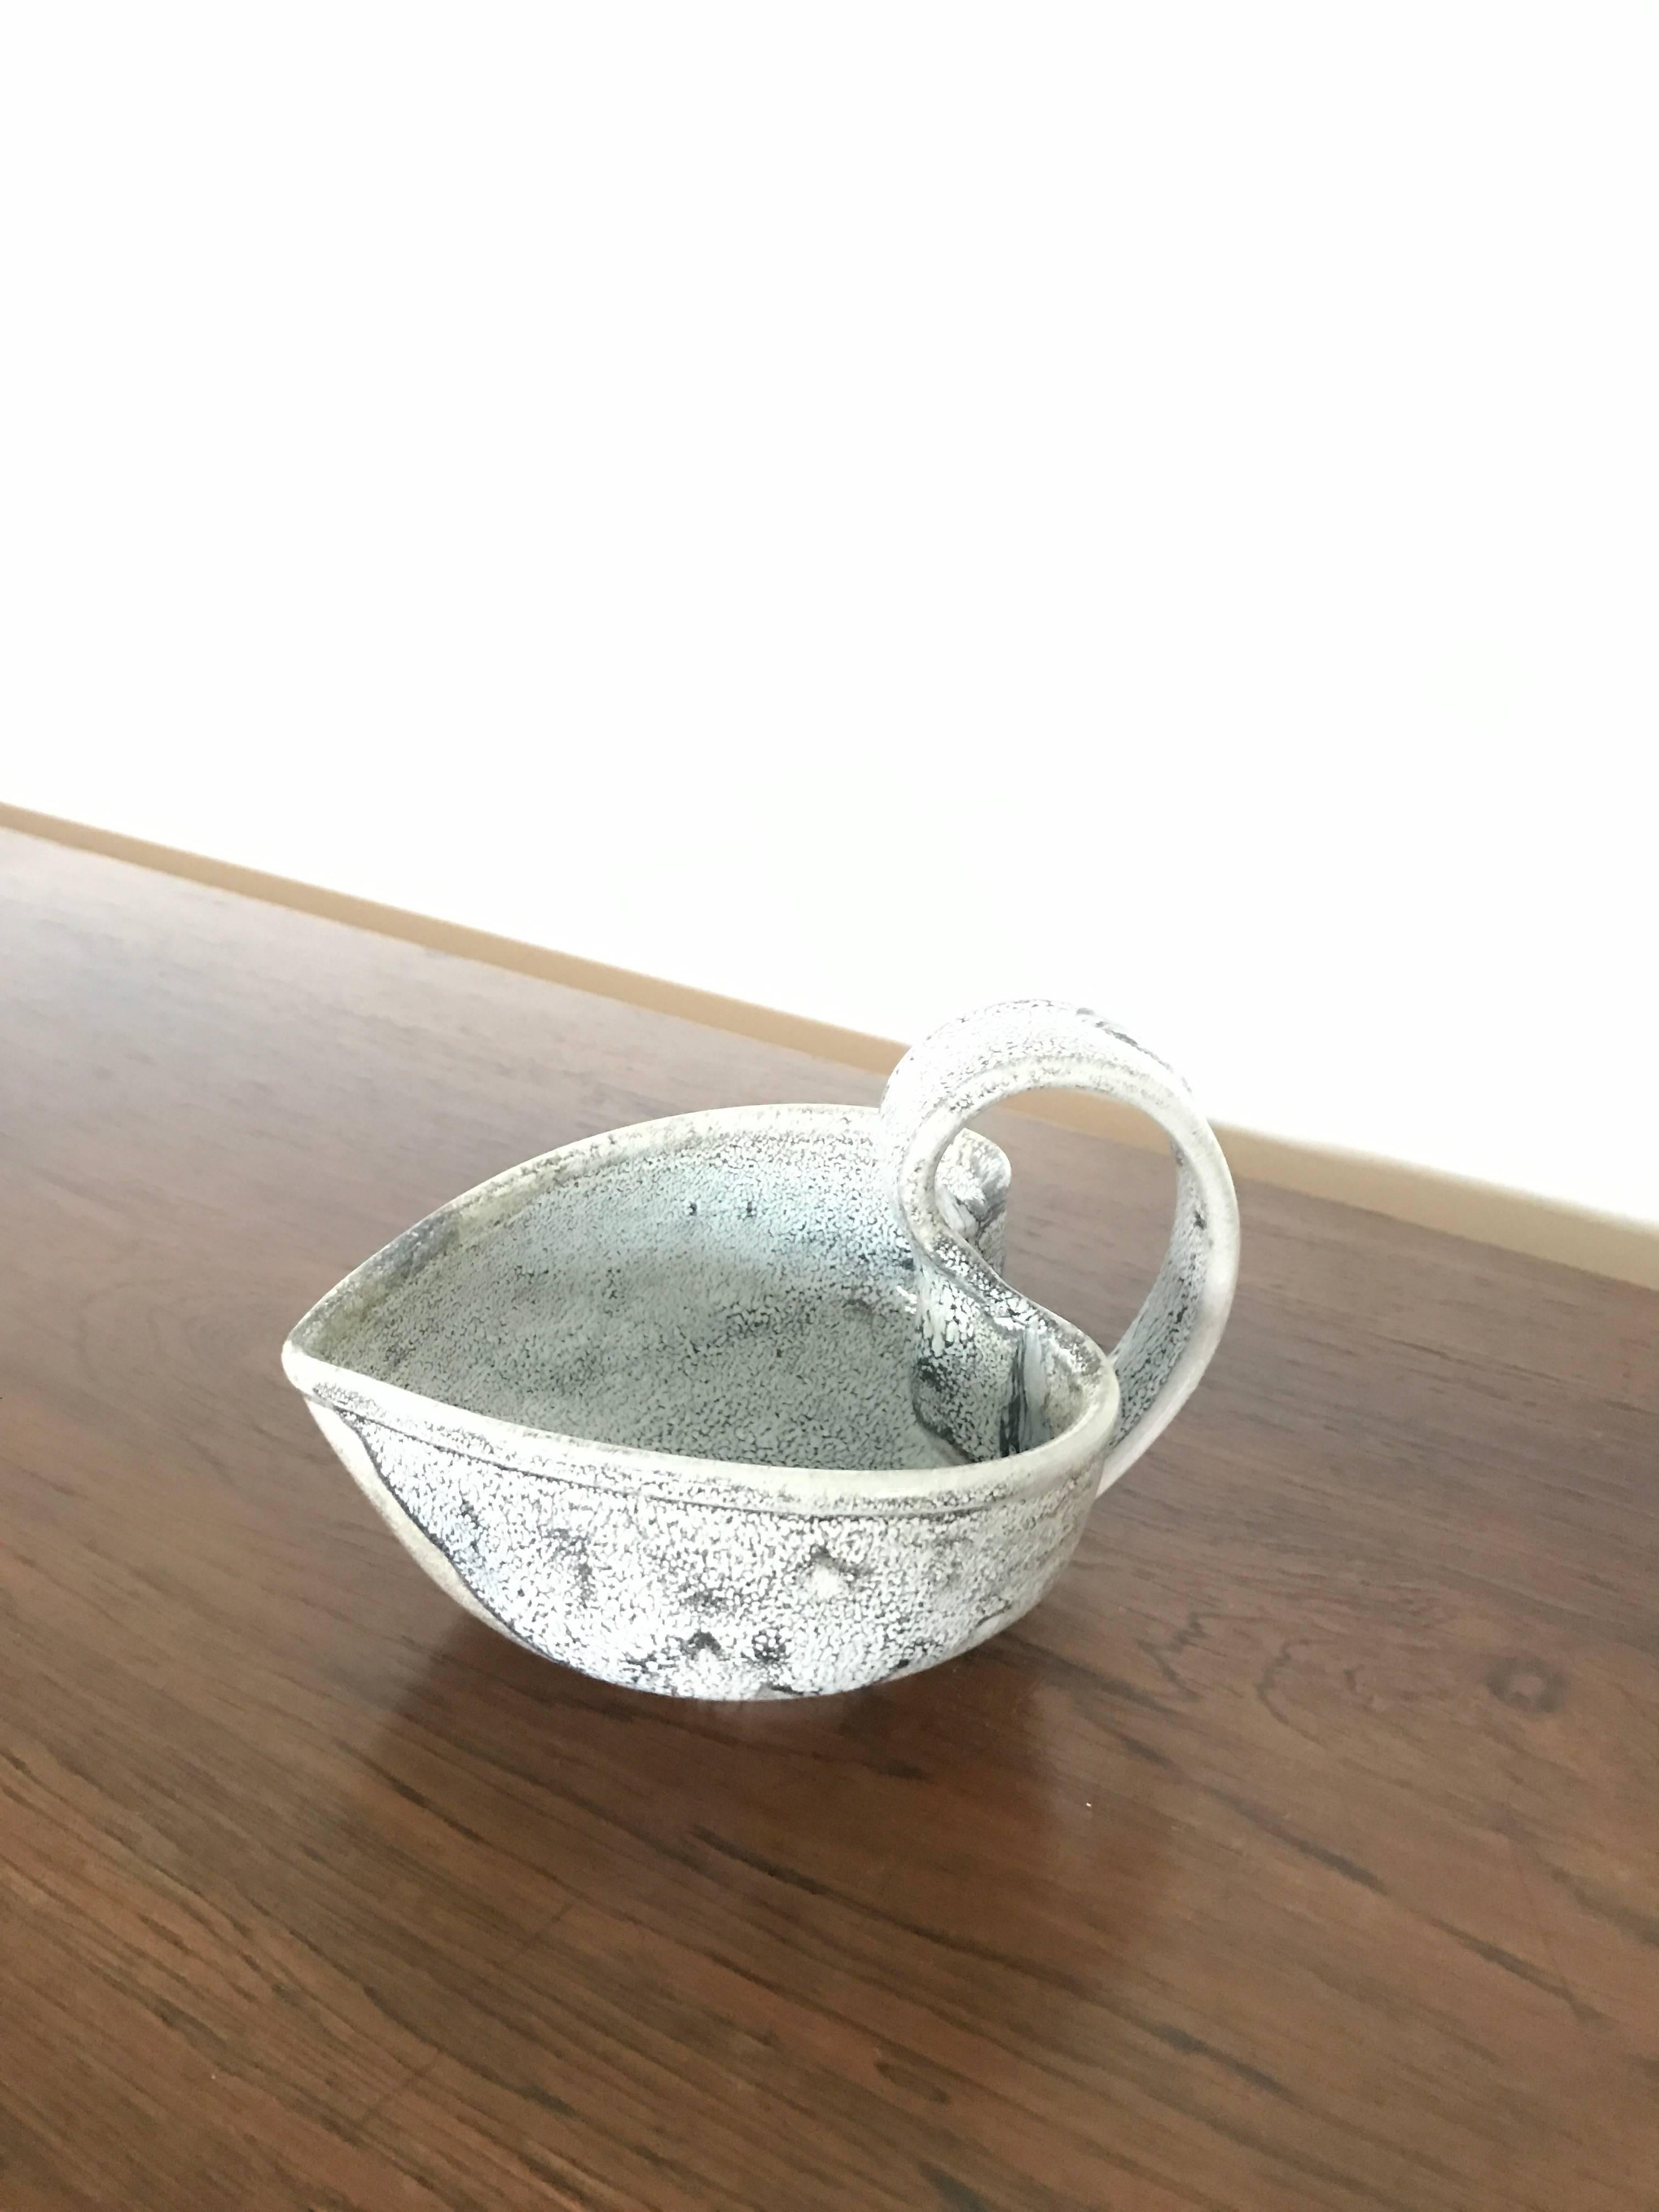 Glazed stoneware bowl, heart shaped, serving bowl in black and grey glaze, also called ash glaze, made by Kähler and designed by Svend Hammershøi 1930s in Denmark. In very good condition. Total height 11 cm, and height of the body/bowl is 7 cm.